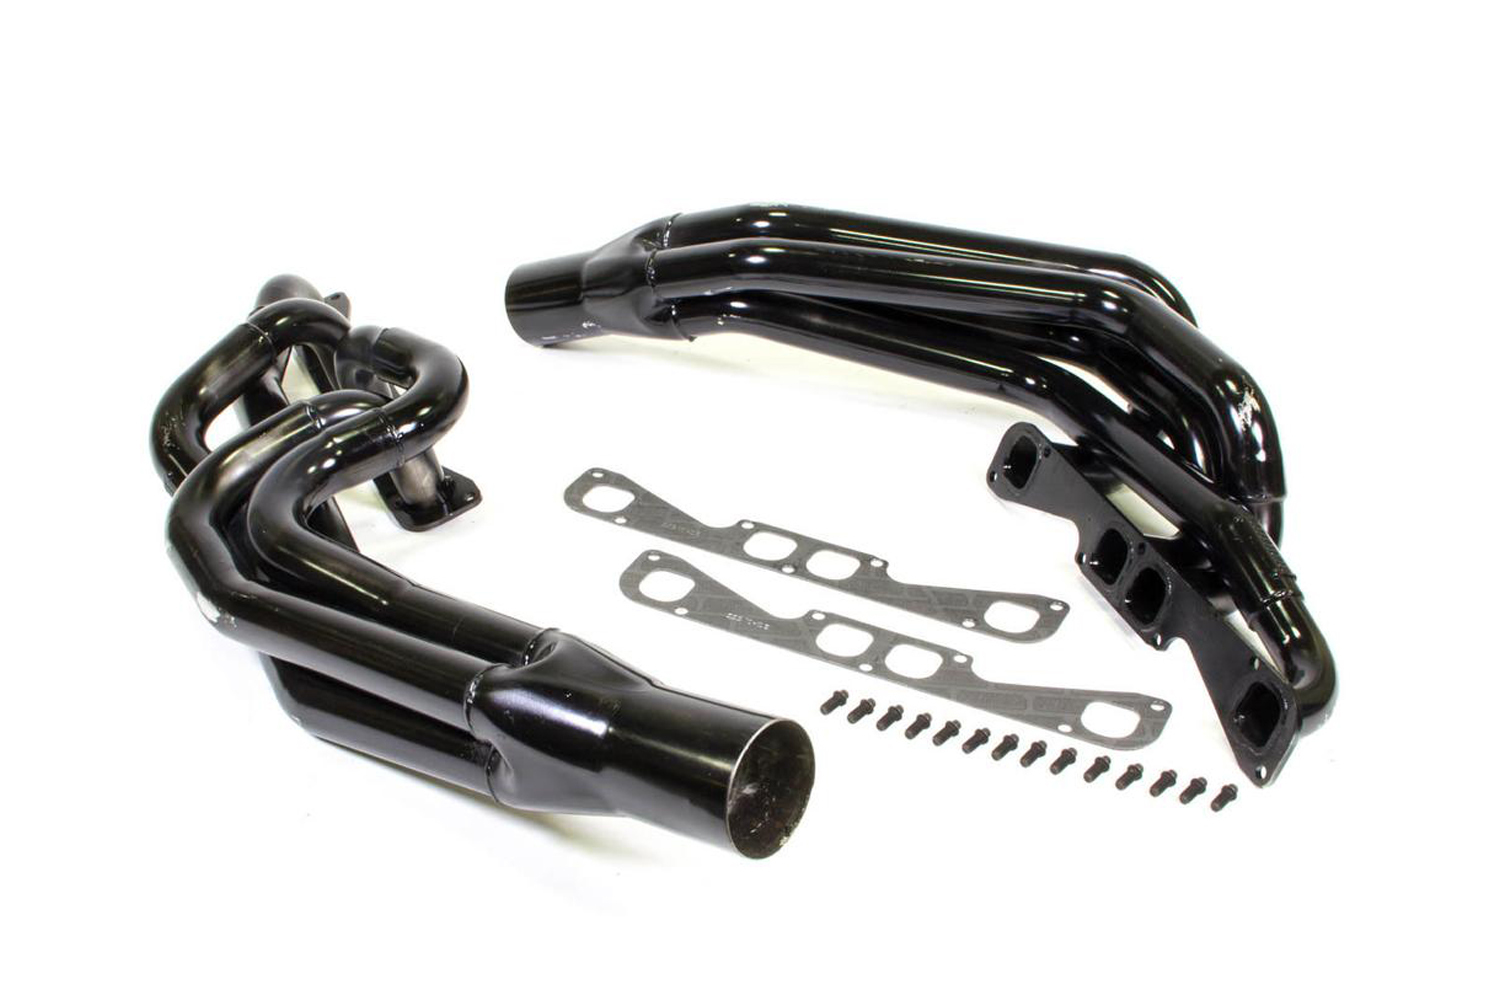 Schoenfeld Headers 136VSP - Headers, Conventional Crossover, 1-3/4 to 1-7/8 in Primary, 3-1/2 in Collector, Spread Port, Steel, Black Paint, Small Block Chevy, Kit